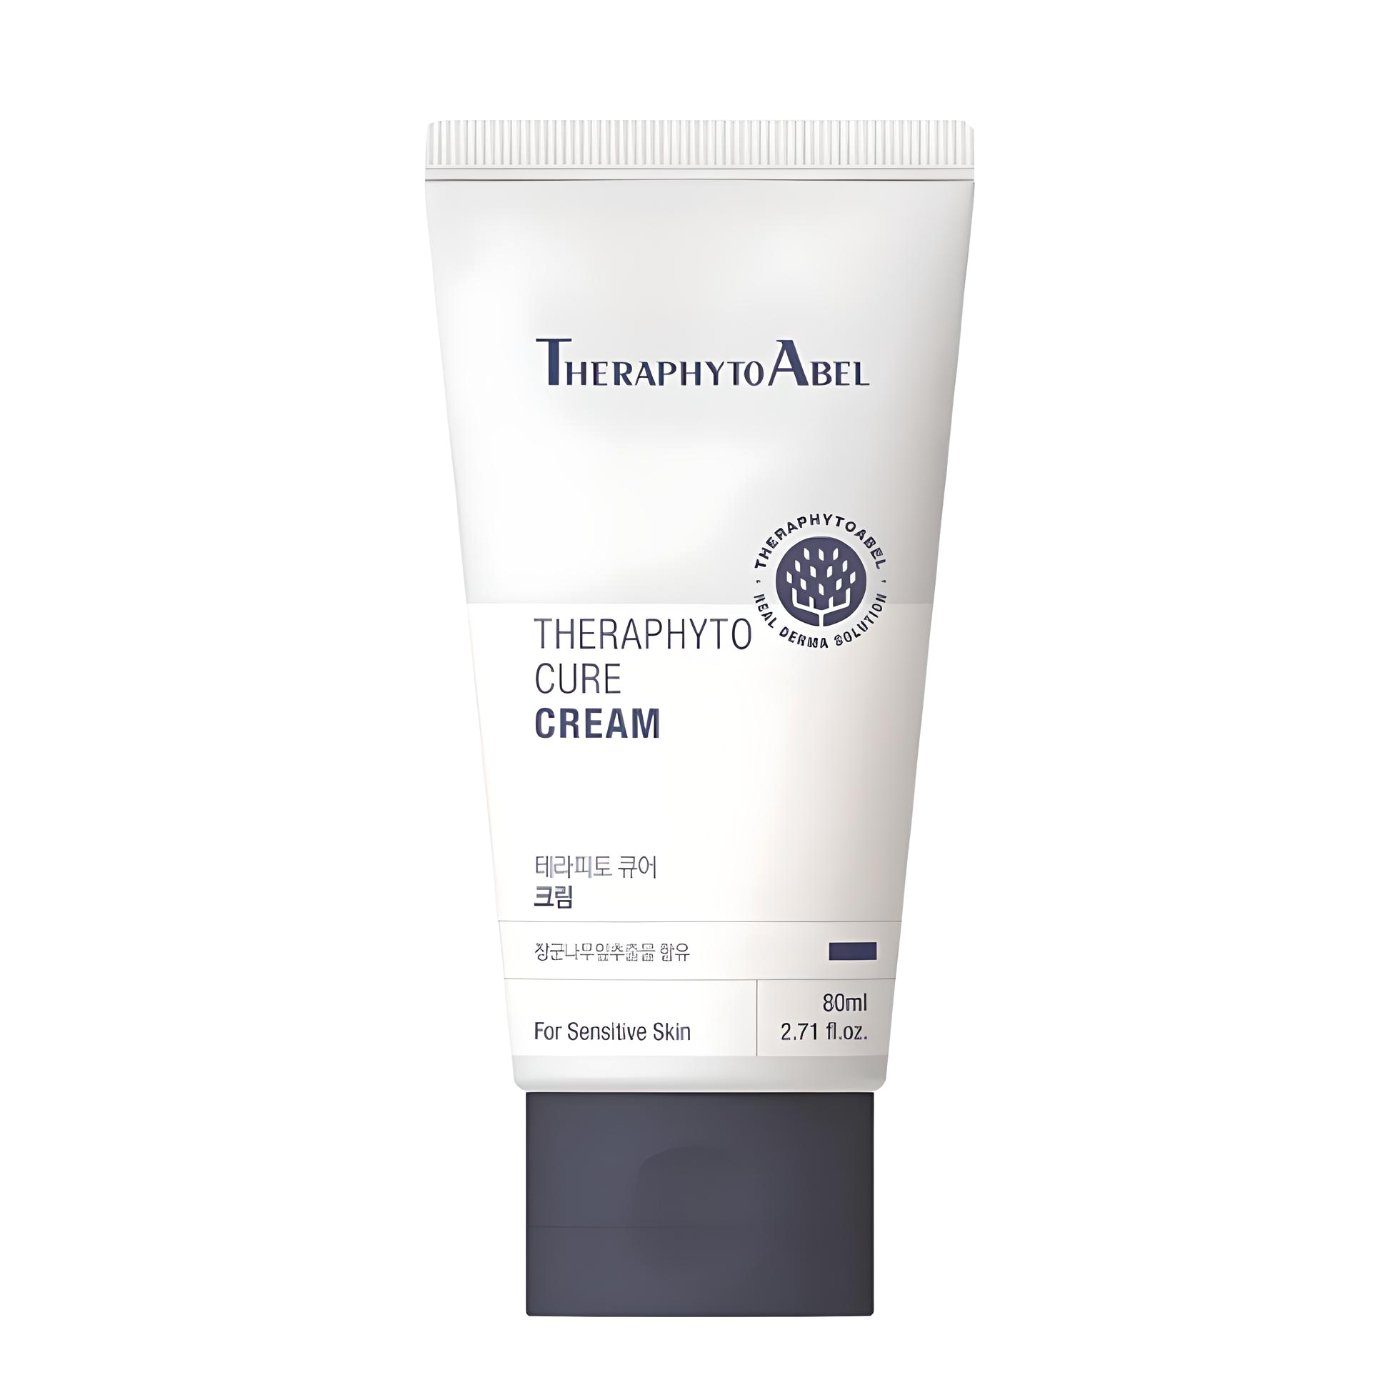 CURE Anti-Aging-Creme TheraphytoAbel CREAM THERAPHYTO